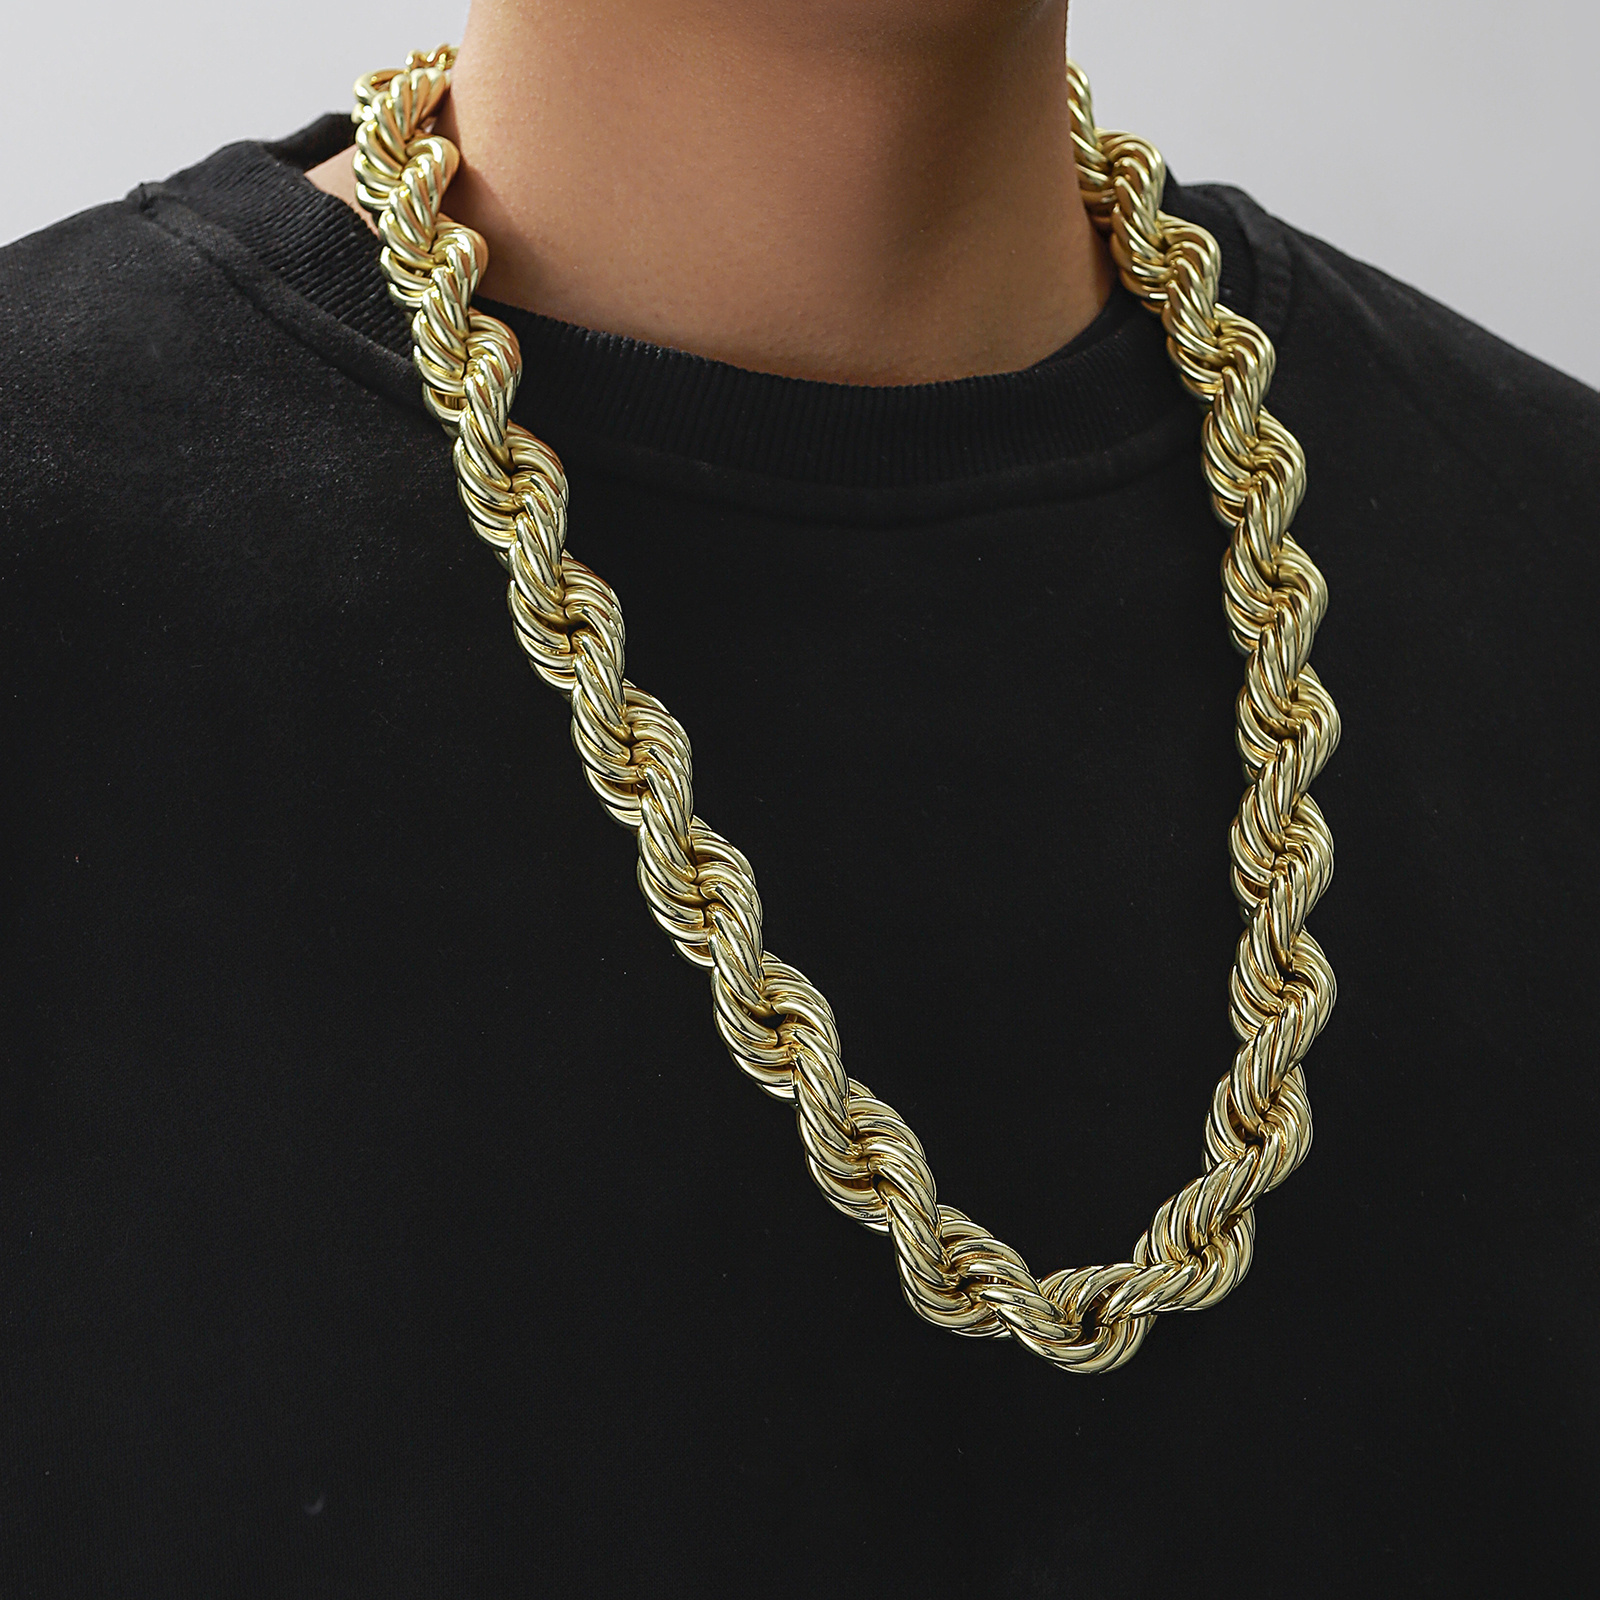 14K 8mm Solid Gold Rope Chain. Thick Heavy Solid Rope Chain. Mens Chains. High Quality Gold Chain.